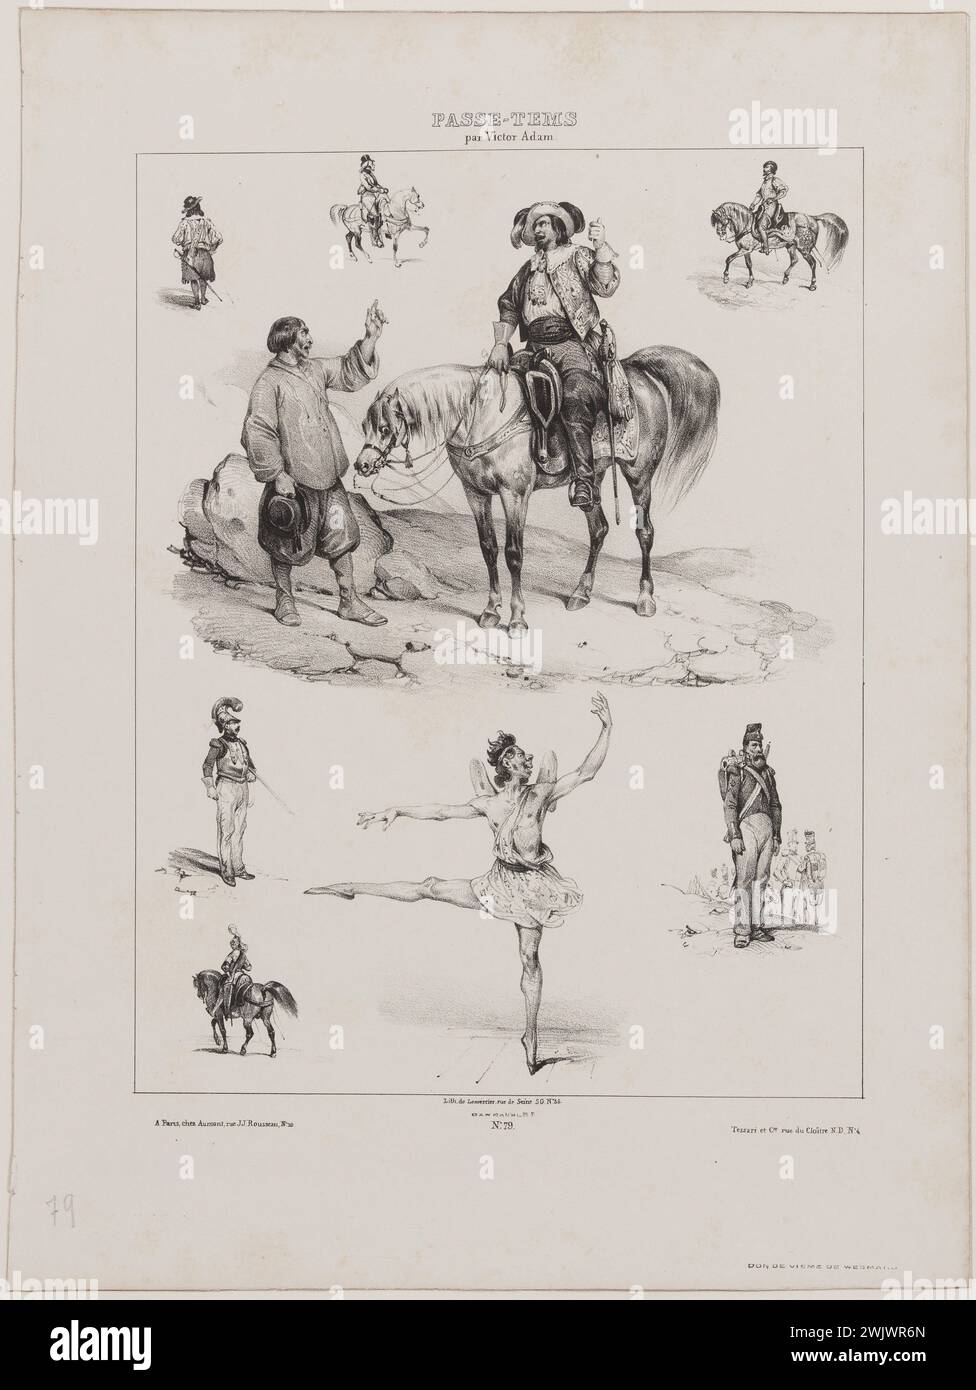 Jean-Victor Adam, known as Victor Adam (1801-1866), French painter and lithographer. Album 'Pass-temps' (Pl.79). Lithography, 19th century. Paris, Carnavalet museum. 78051-29 Passe-time album, rider, horse, dancer, drawing, illustration, lithography, character, soldier, 19th 19th 19th 19th 19th 19th century Stock Photo